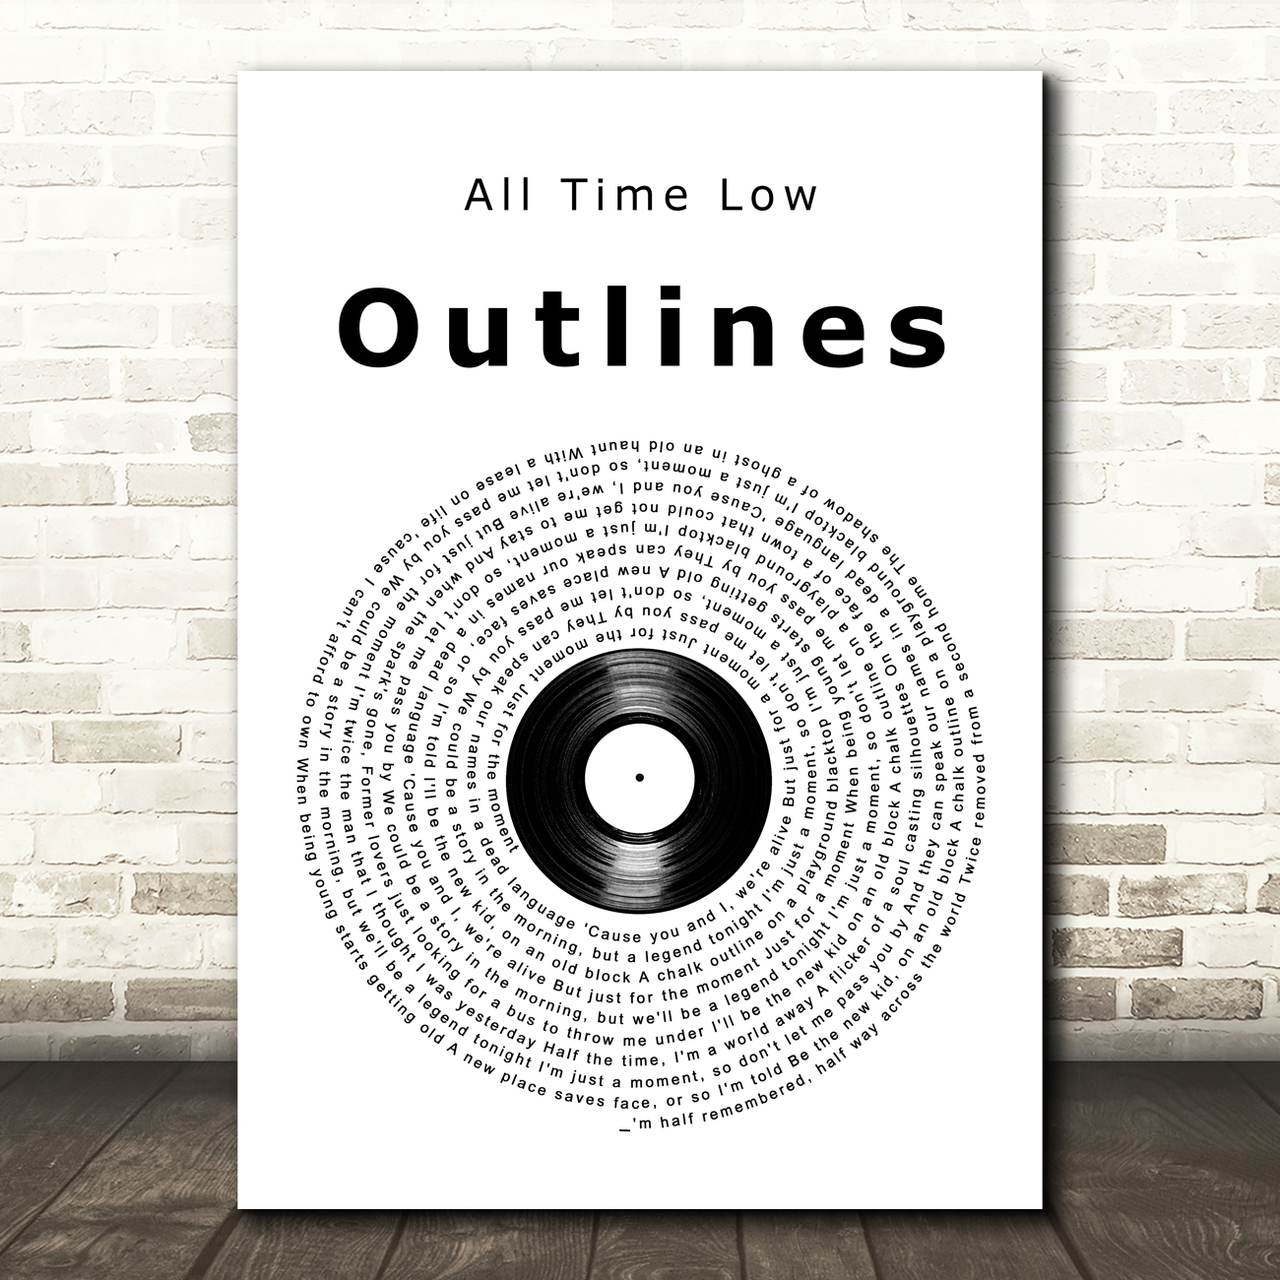 All Time Low Outlines Vinyl Record Song Lyric Art Print